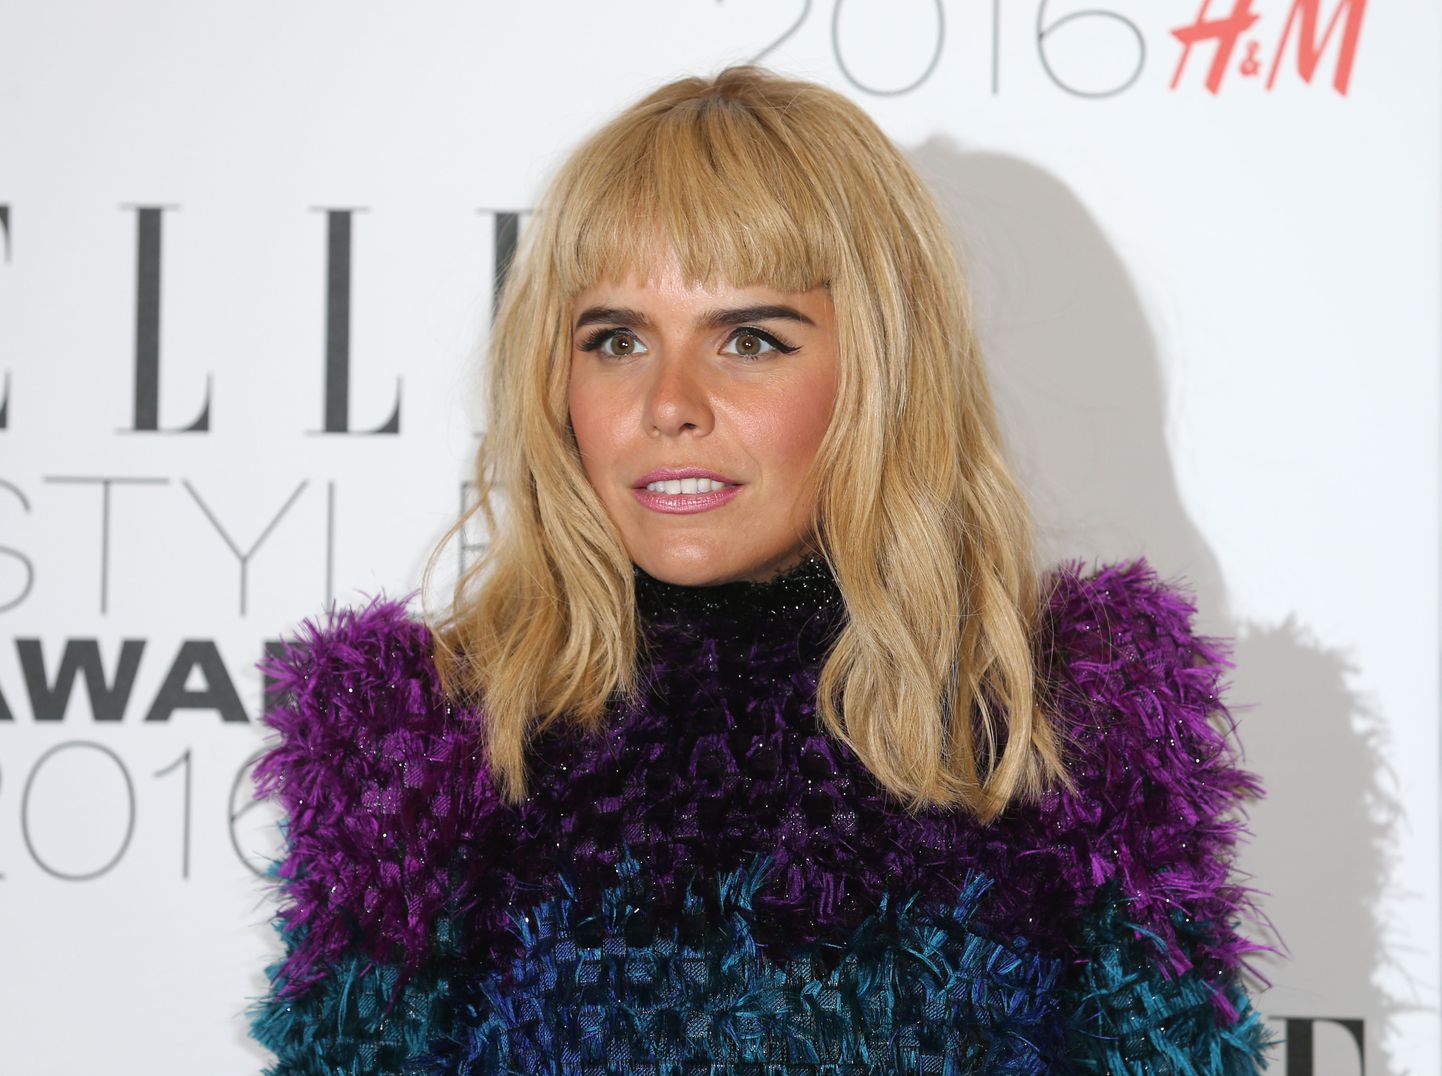 British singer Paloma Faith poses for photographers as she arrives for the ELLE Style Awards 2016 in London on February 23, 2016. / AFP / JUSTIN TALLIS